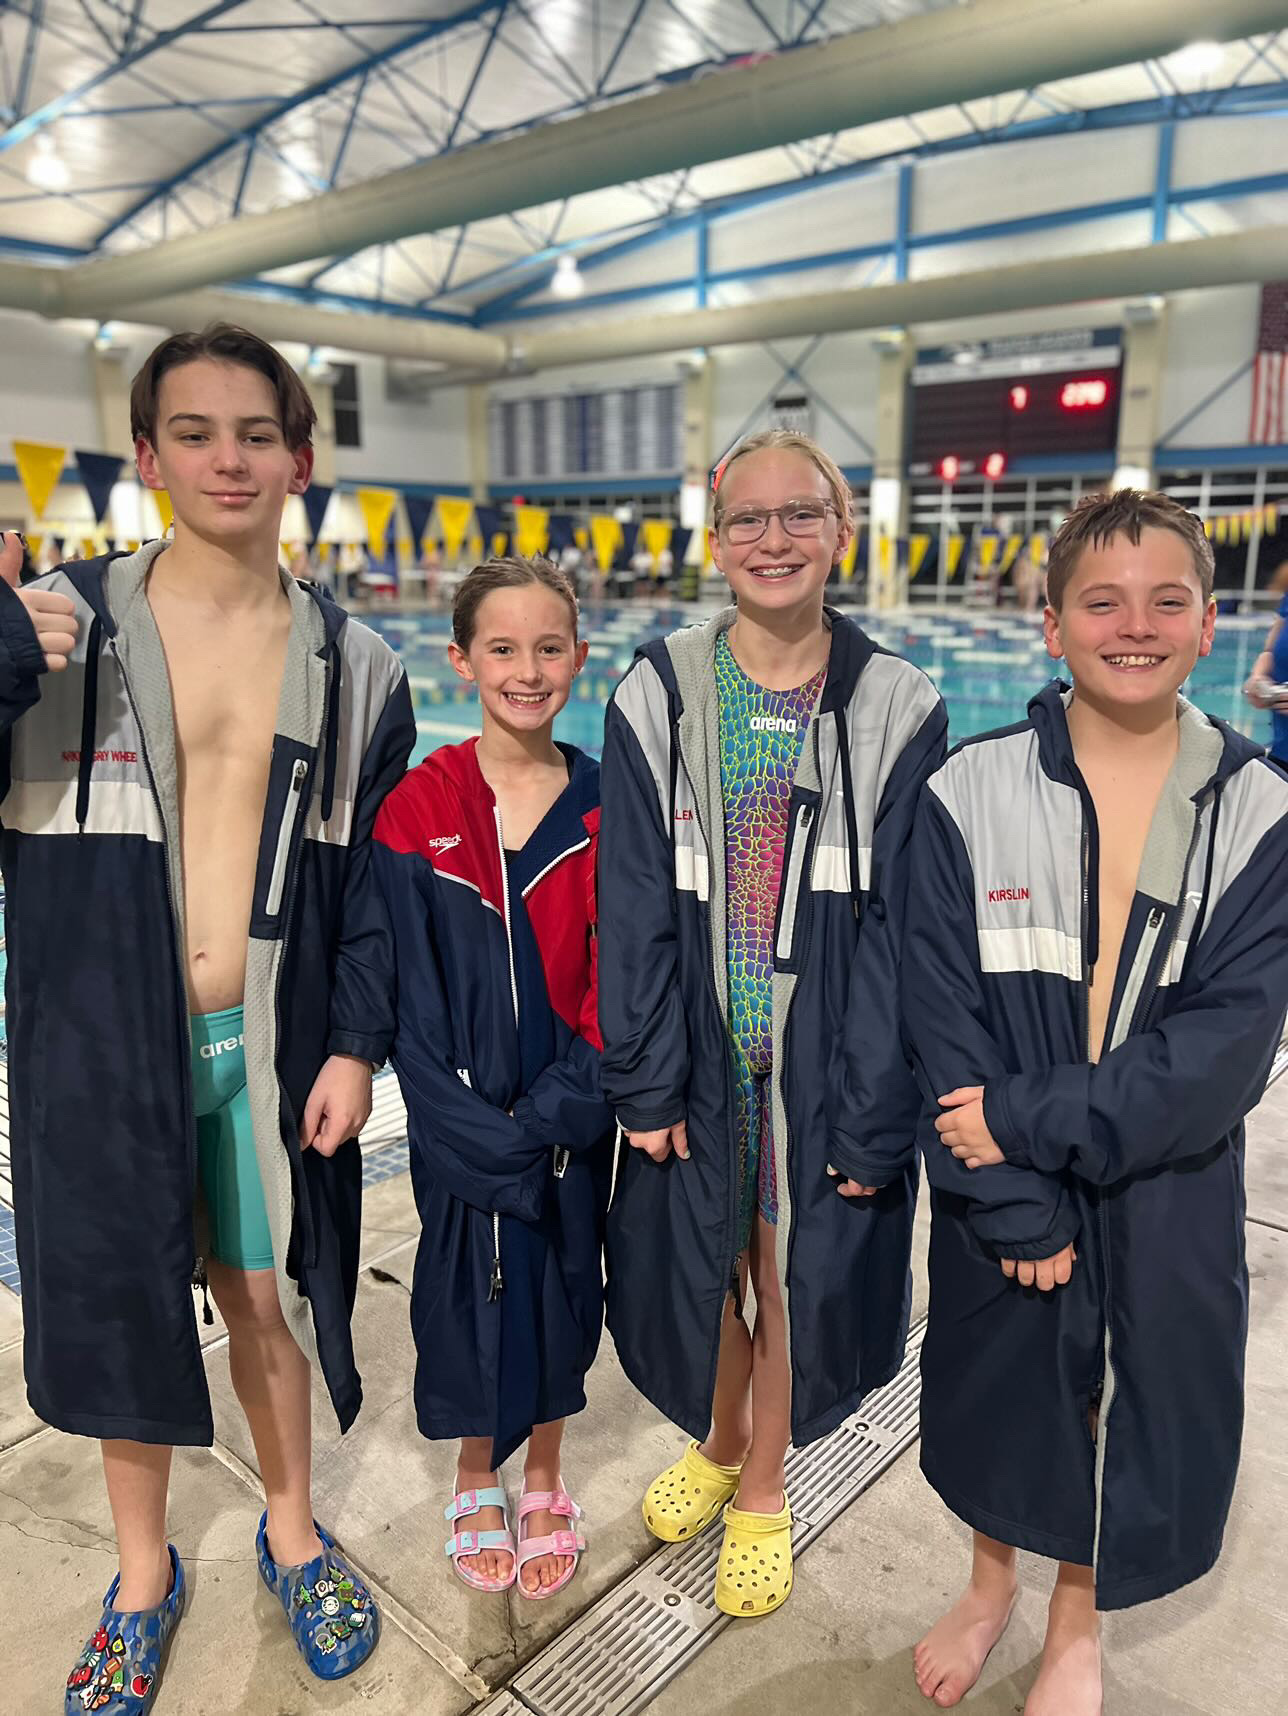 Parker Wheeler Sets Georgia 10 & Under LSC Records in 200 & 500 Freestyles  At Lanier